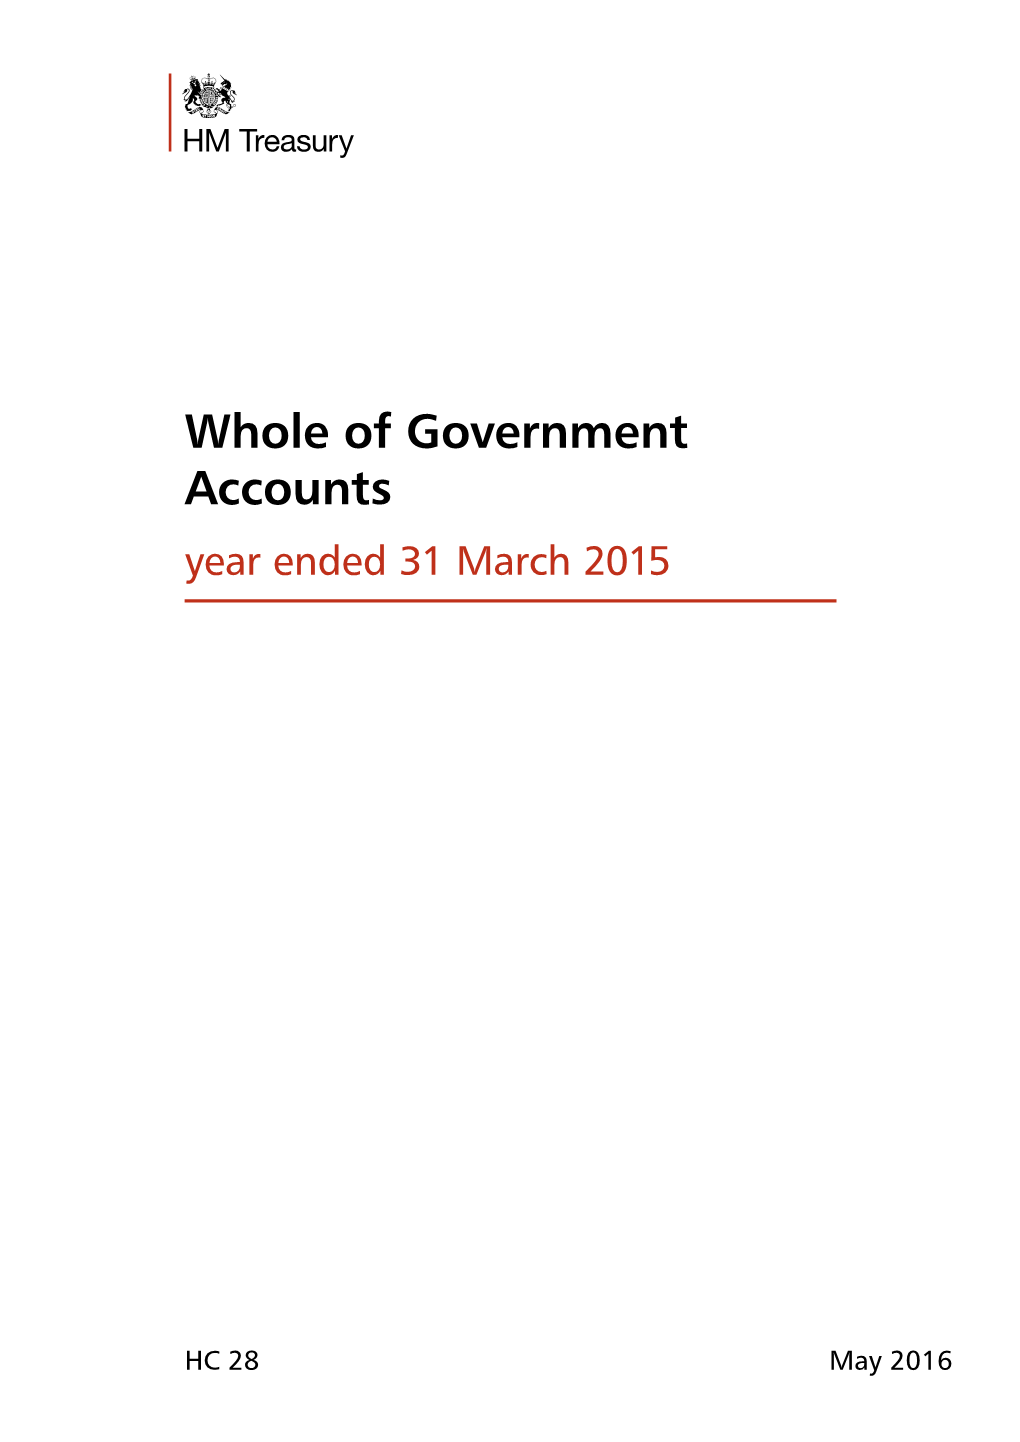 Whole of Government Accounts; Year Ended 31 March 2015